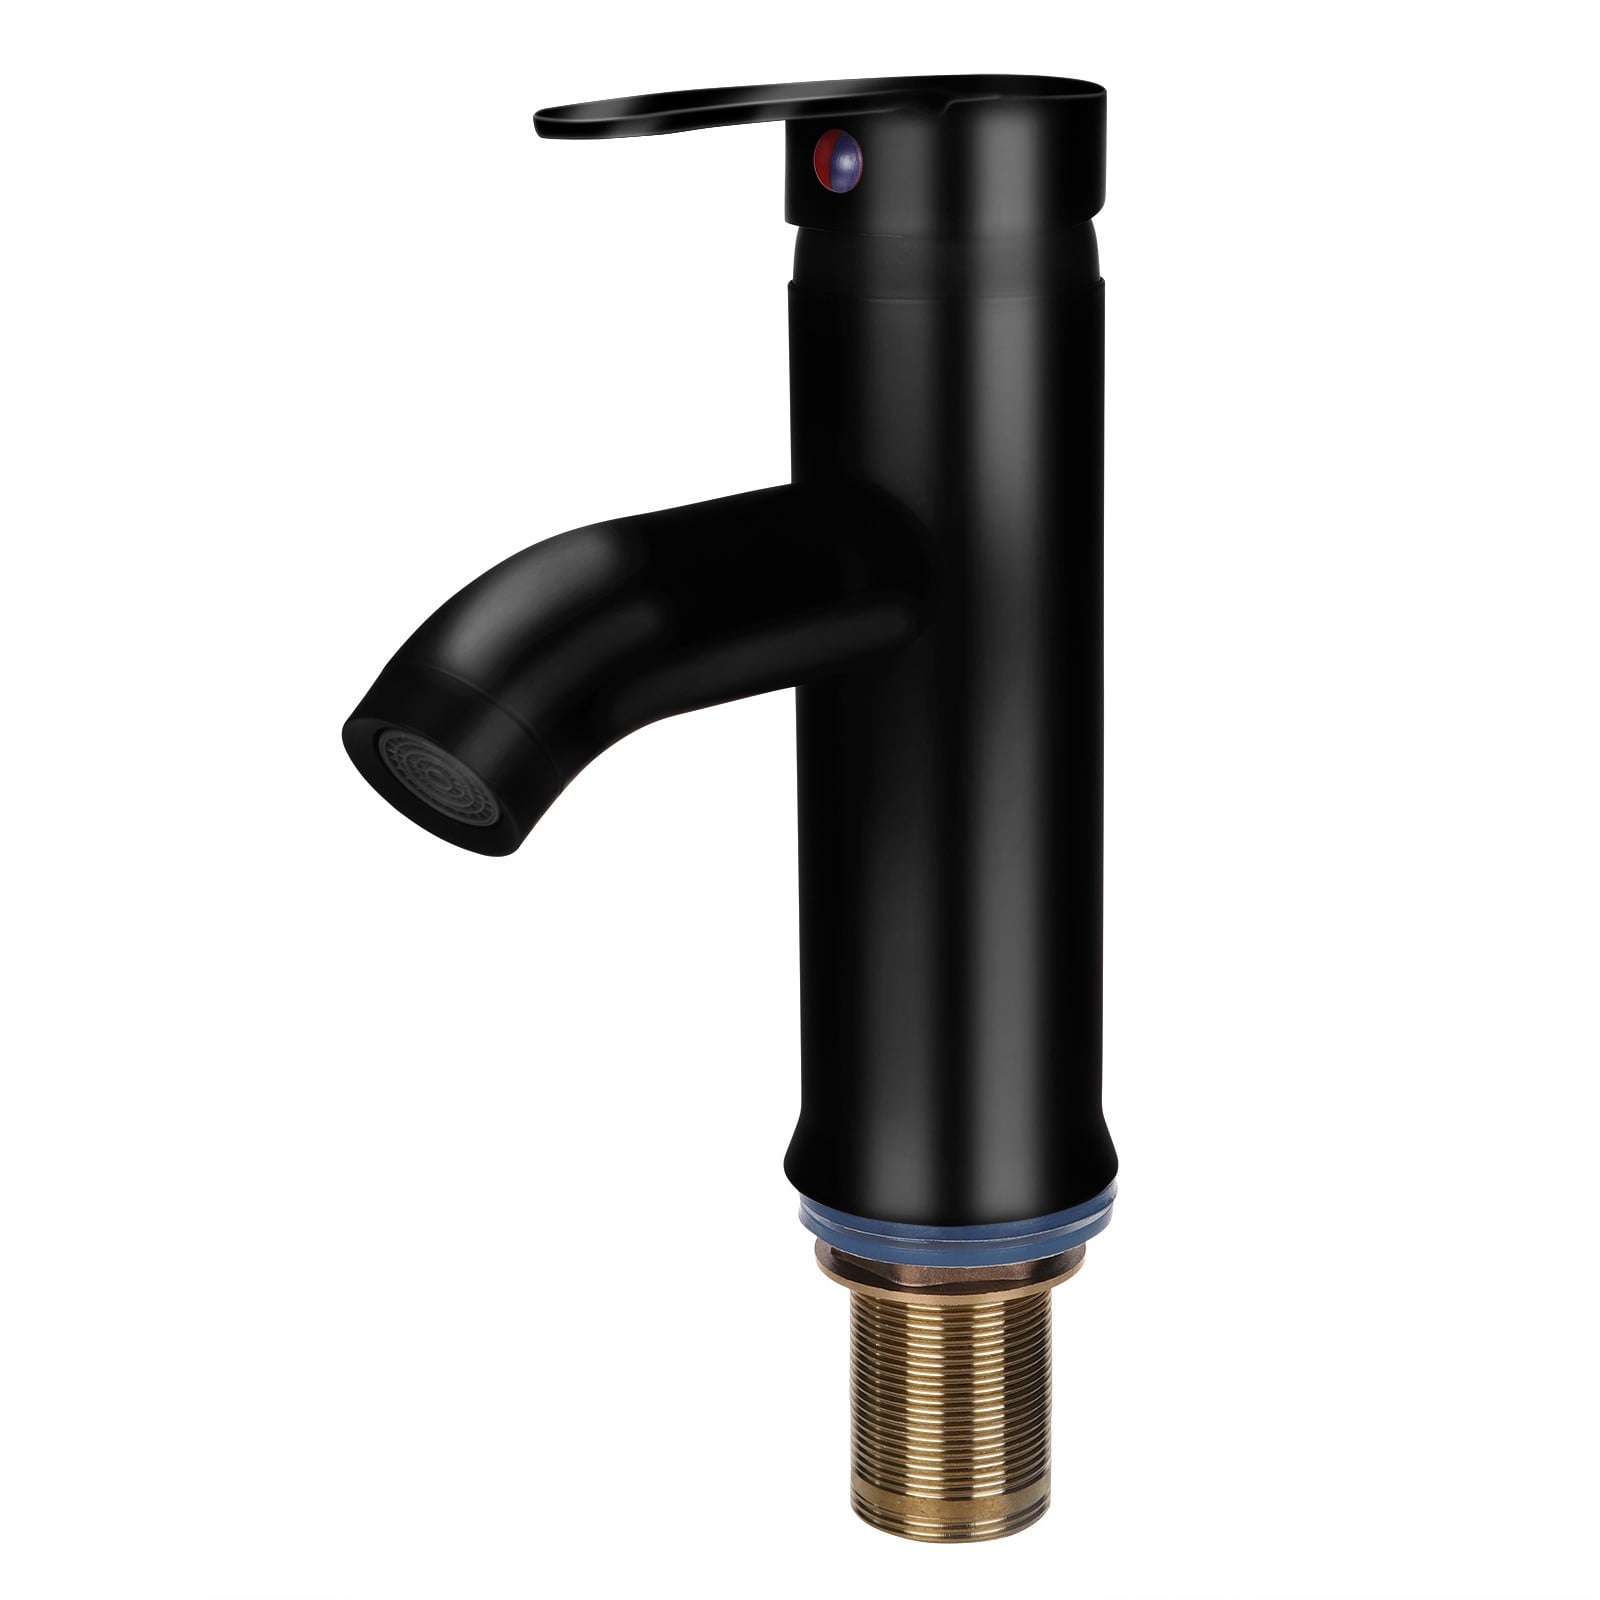 Details about   New Style Hot &Cold Basin Faucet Sink Mixer Tap Brass Water Faucet Matte Black